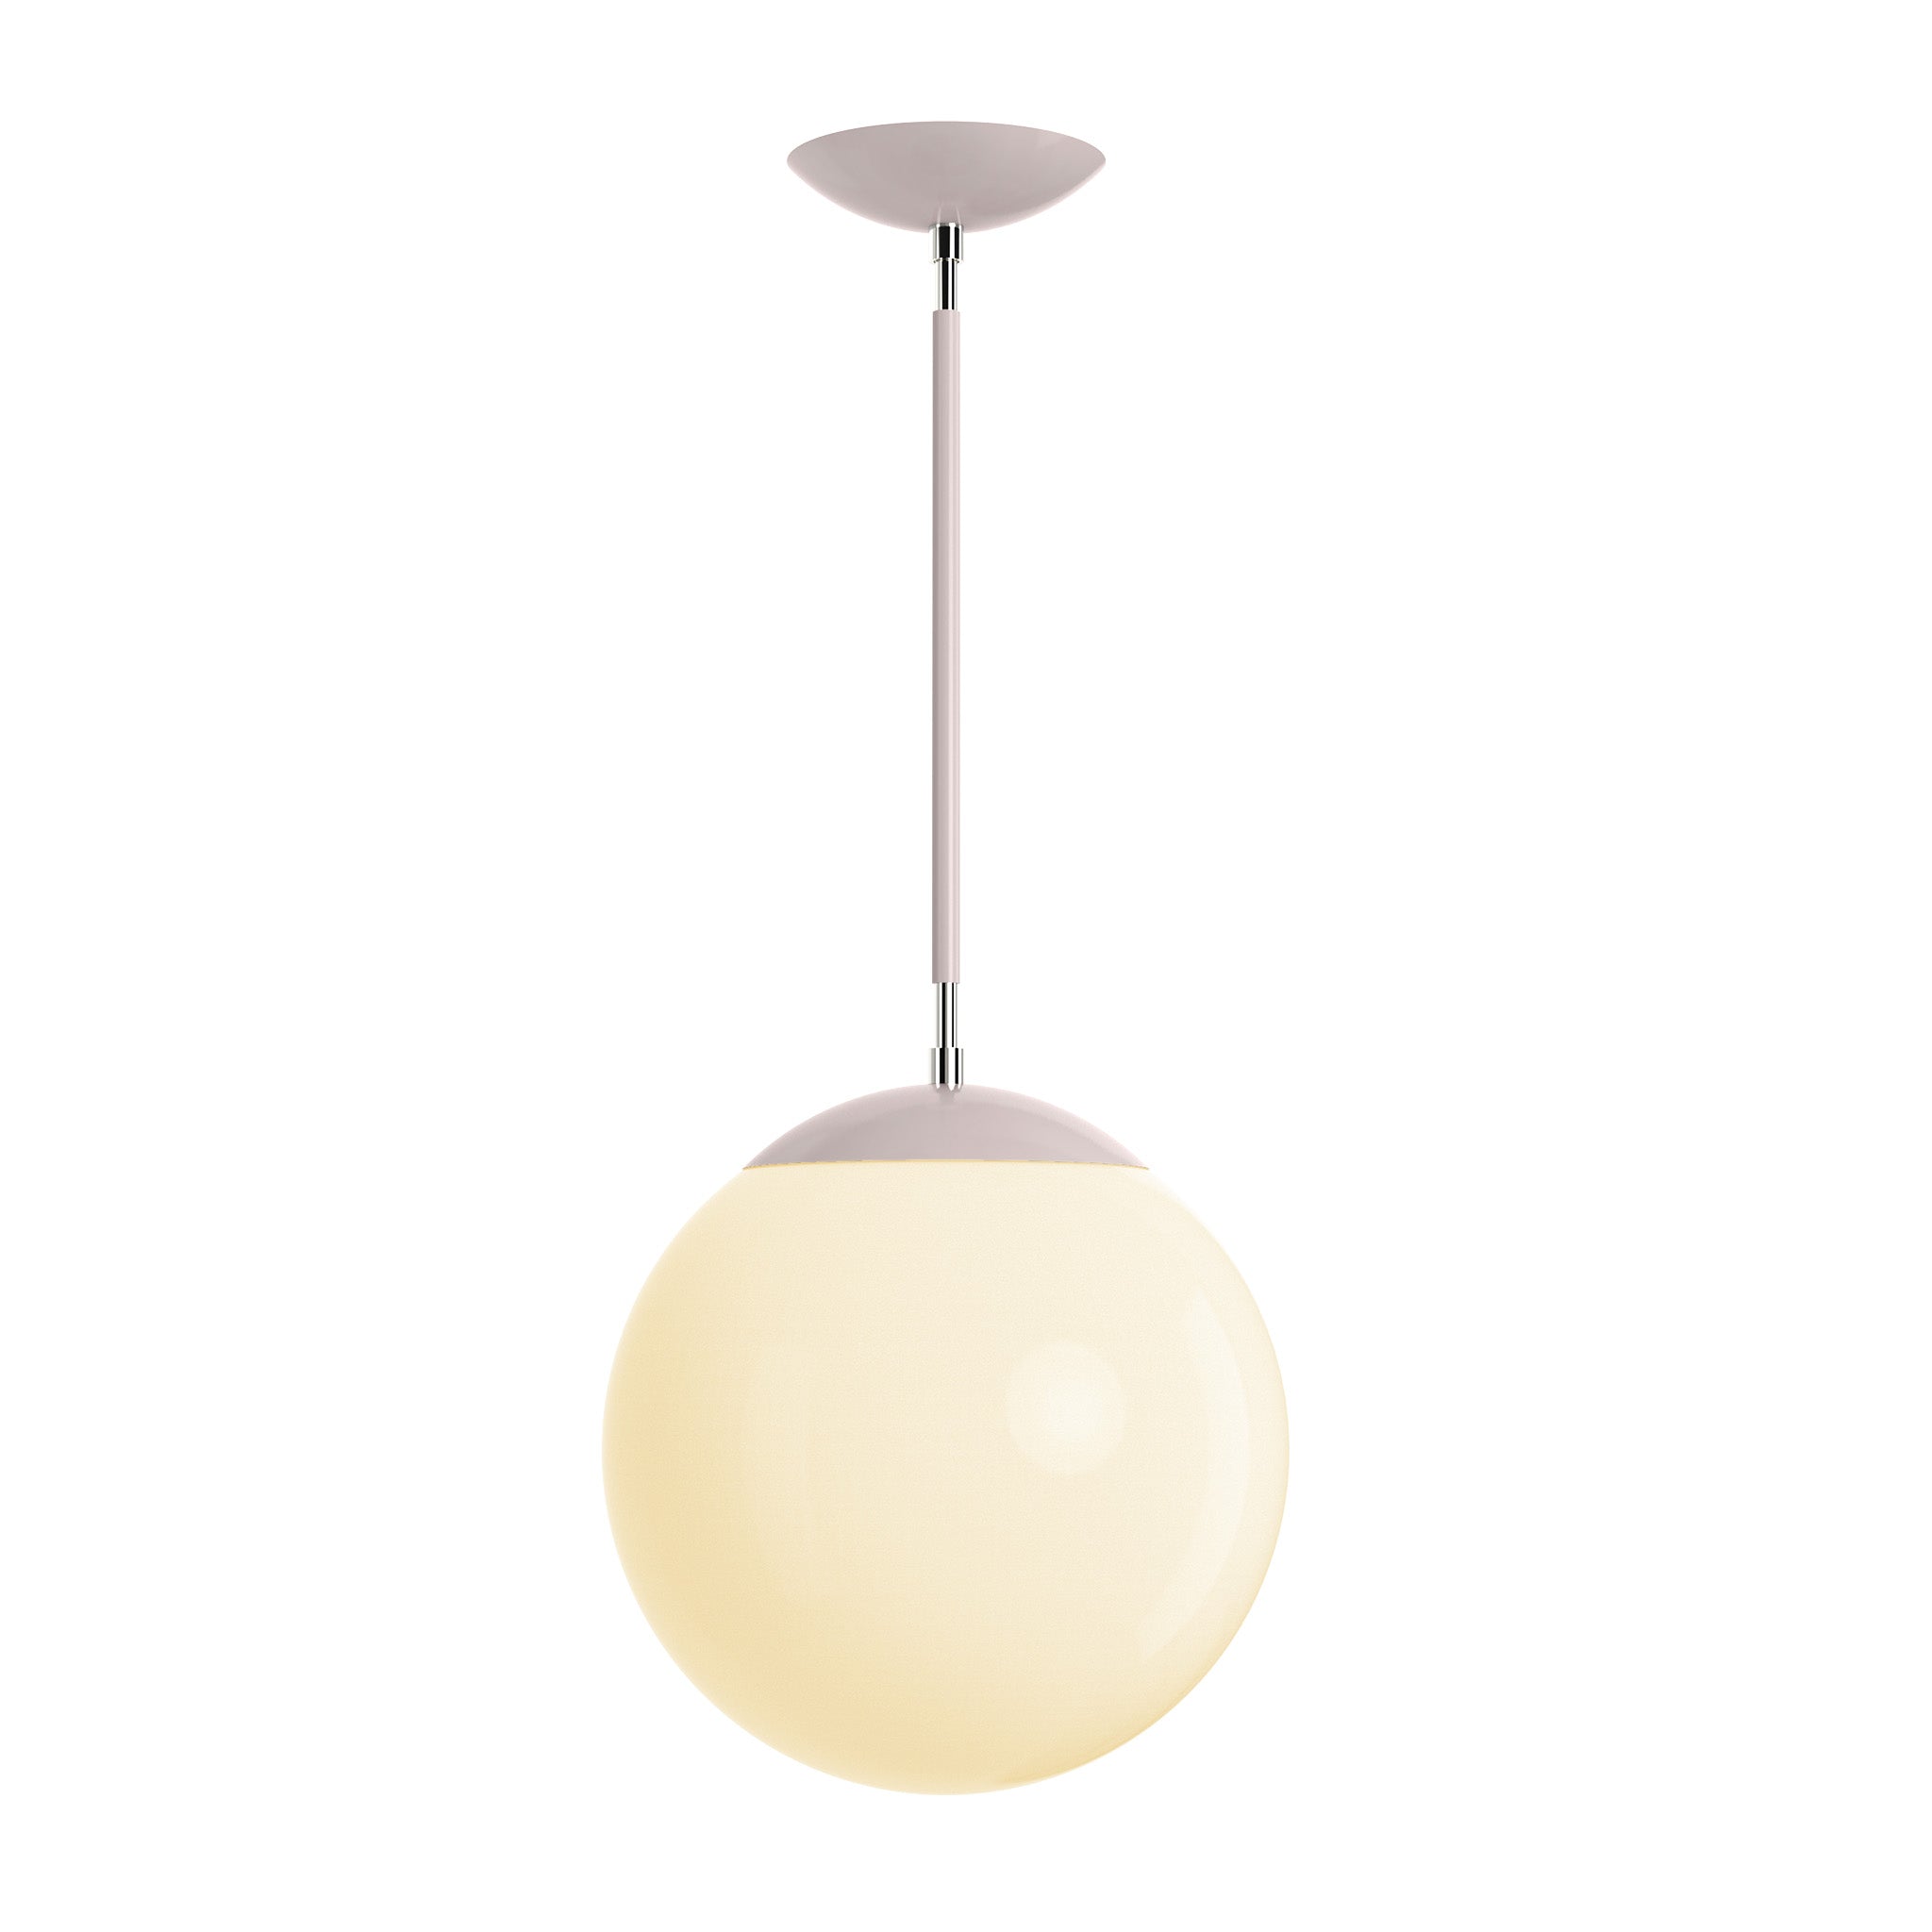 Polished nickel and barely cap globe pendant 12" dutton brown lighting